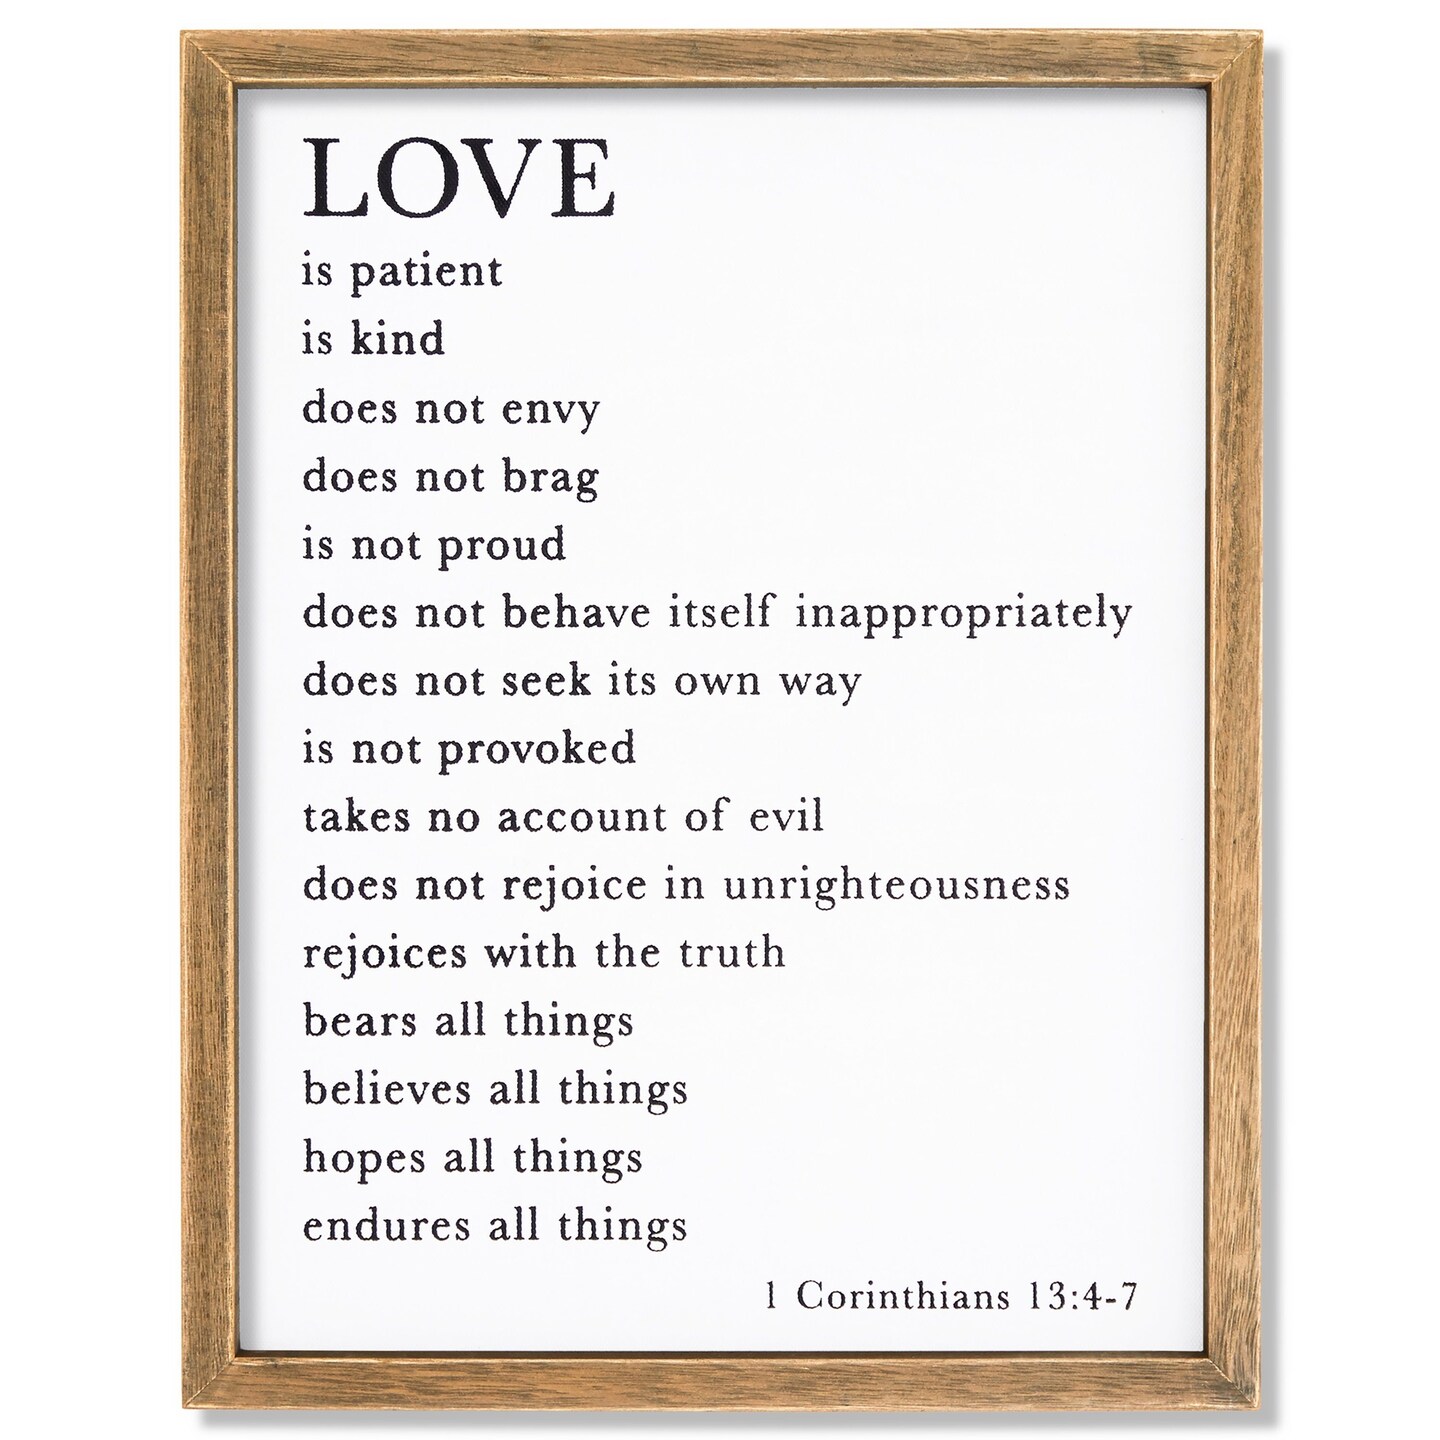 Christian Religious Scripture Wall Art Decor, 1 Corinthians 13 4-7, Rustic Style Home Decorations (11.75 x 15 In)